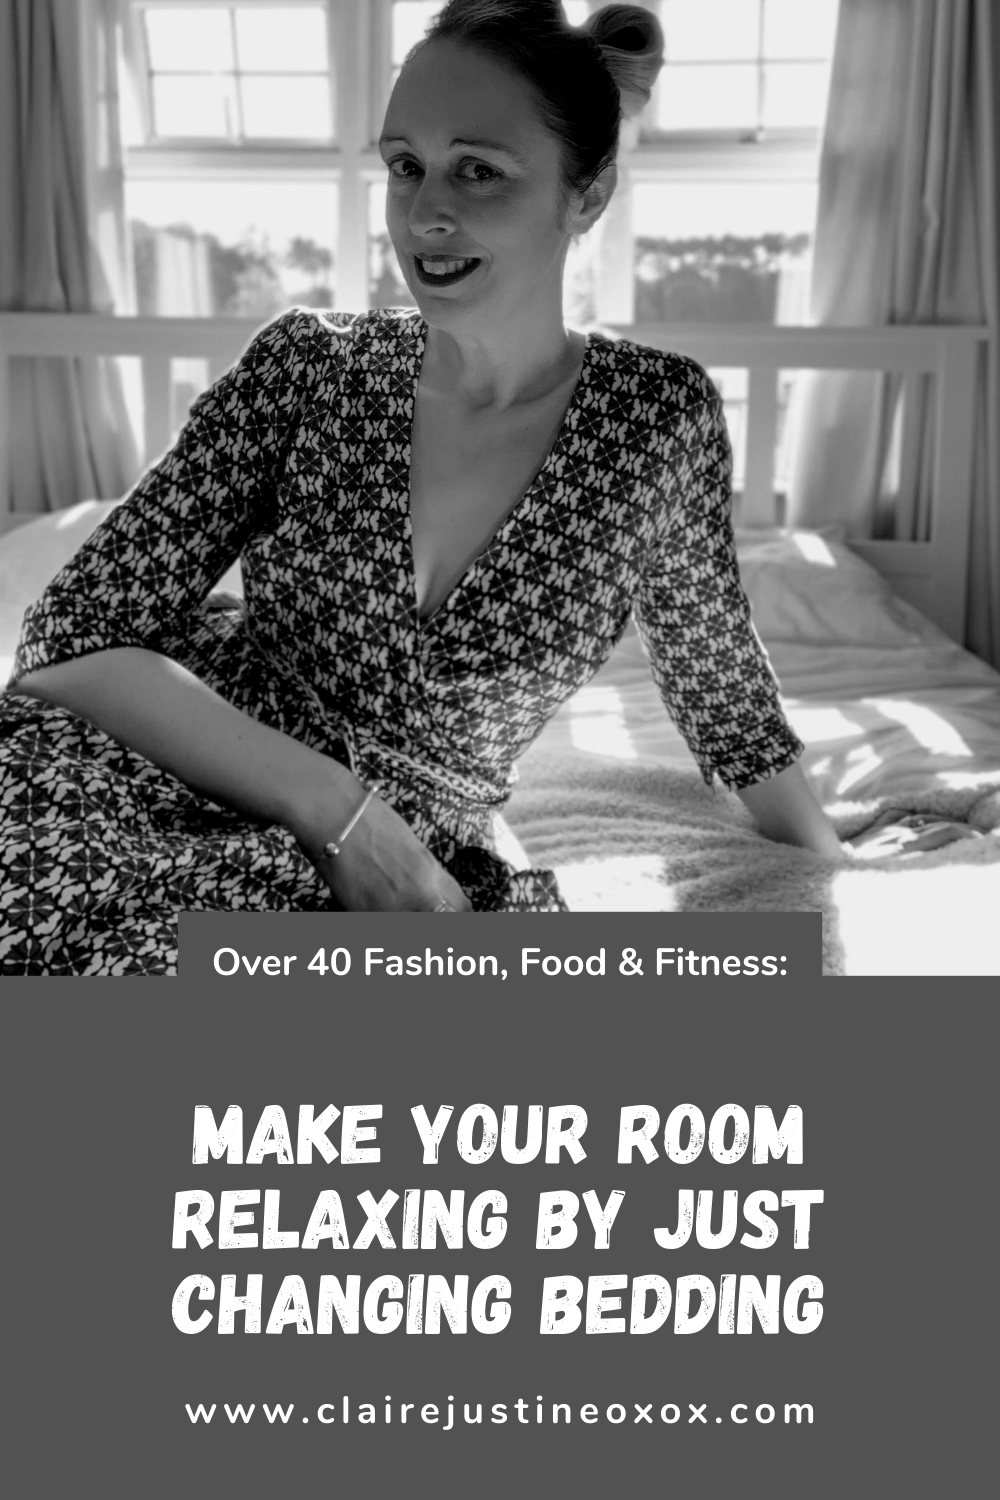 Make Your Room Relaxing By Just Changing Bedding